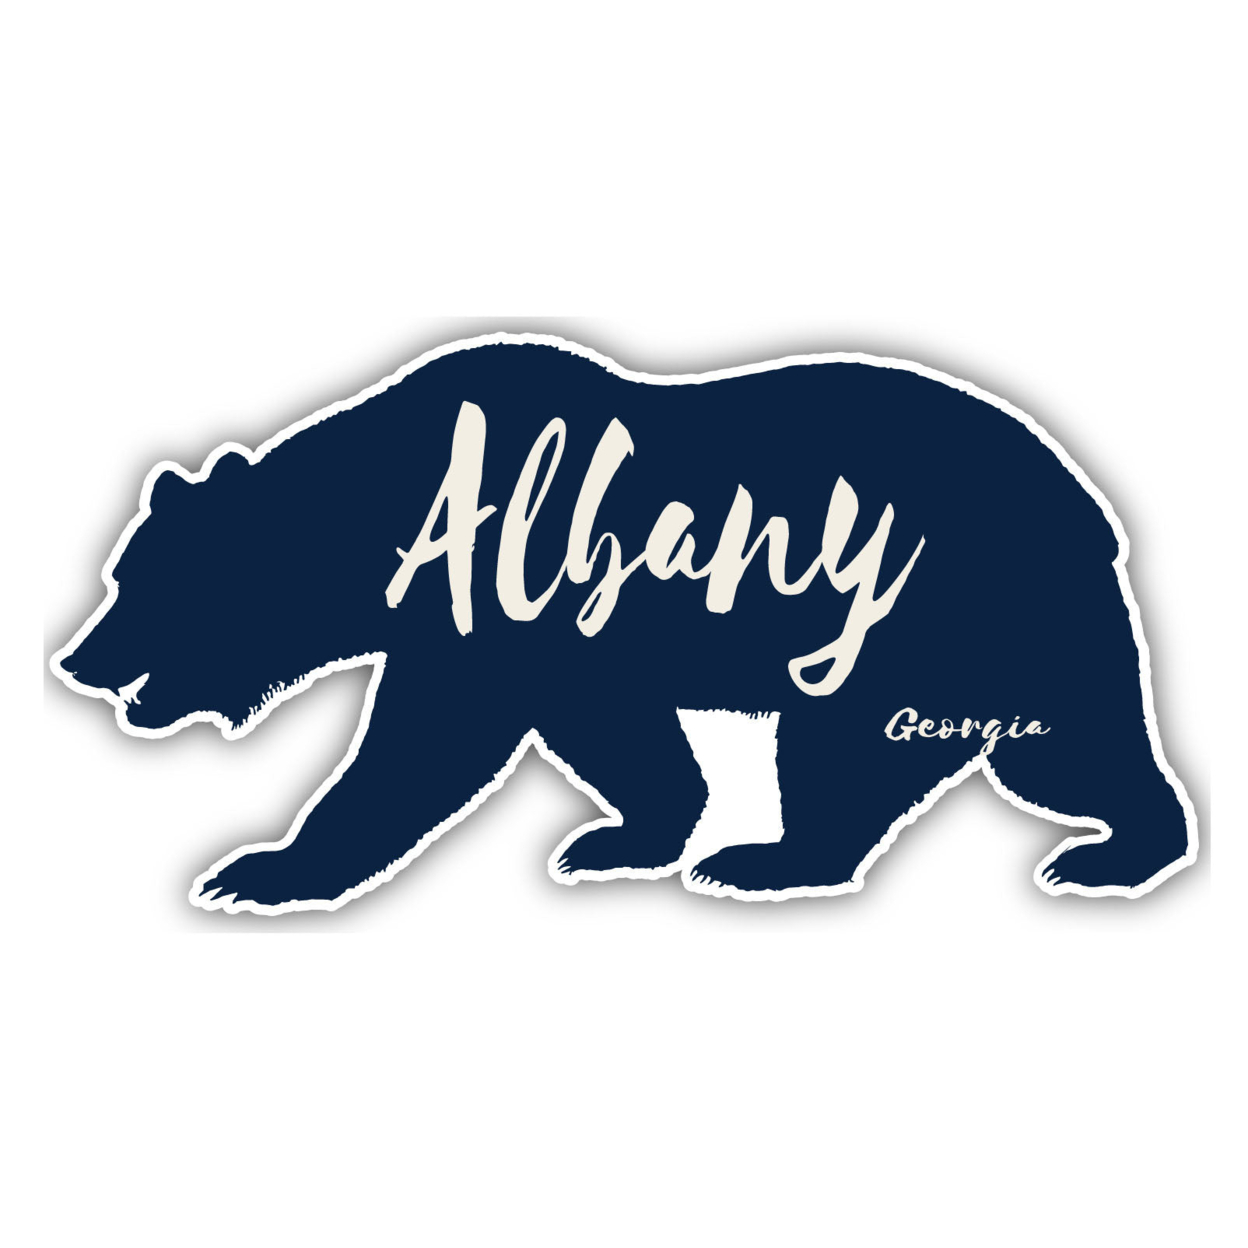 Albany Georgia Souvenir Decorative Stickers (Choose Theme And Size) - 4-Pack, 8-Inch, Tent